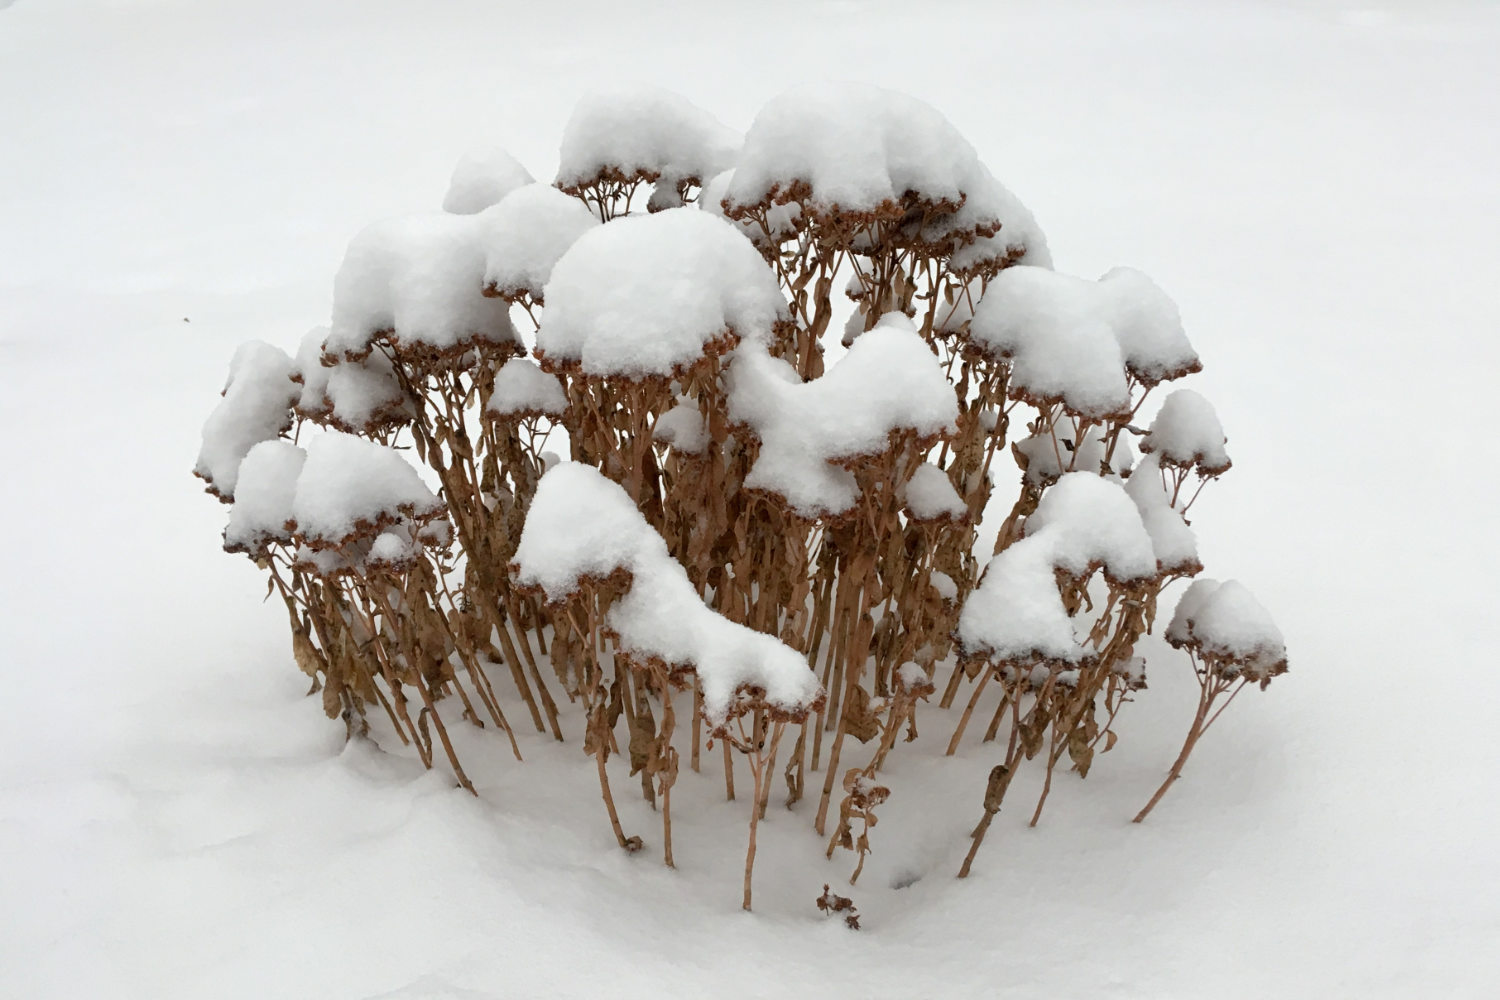 Clump of snow-capped dried brown stems in the snow